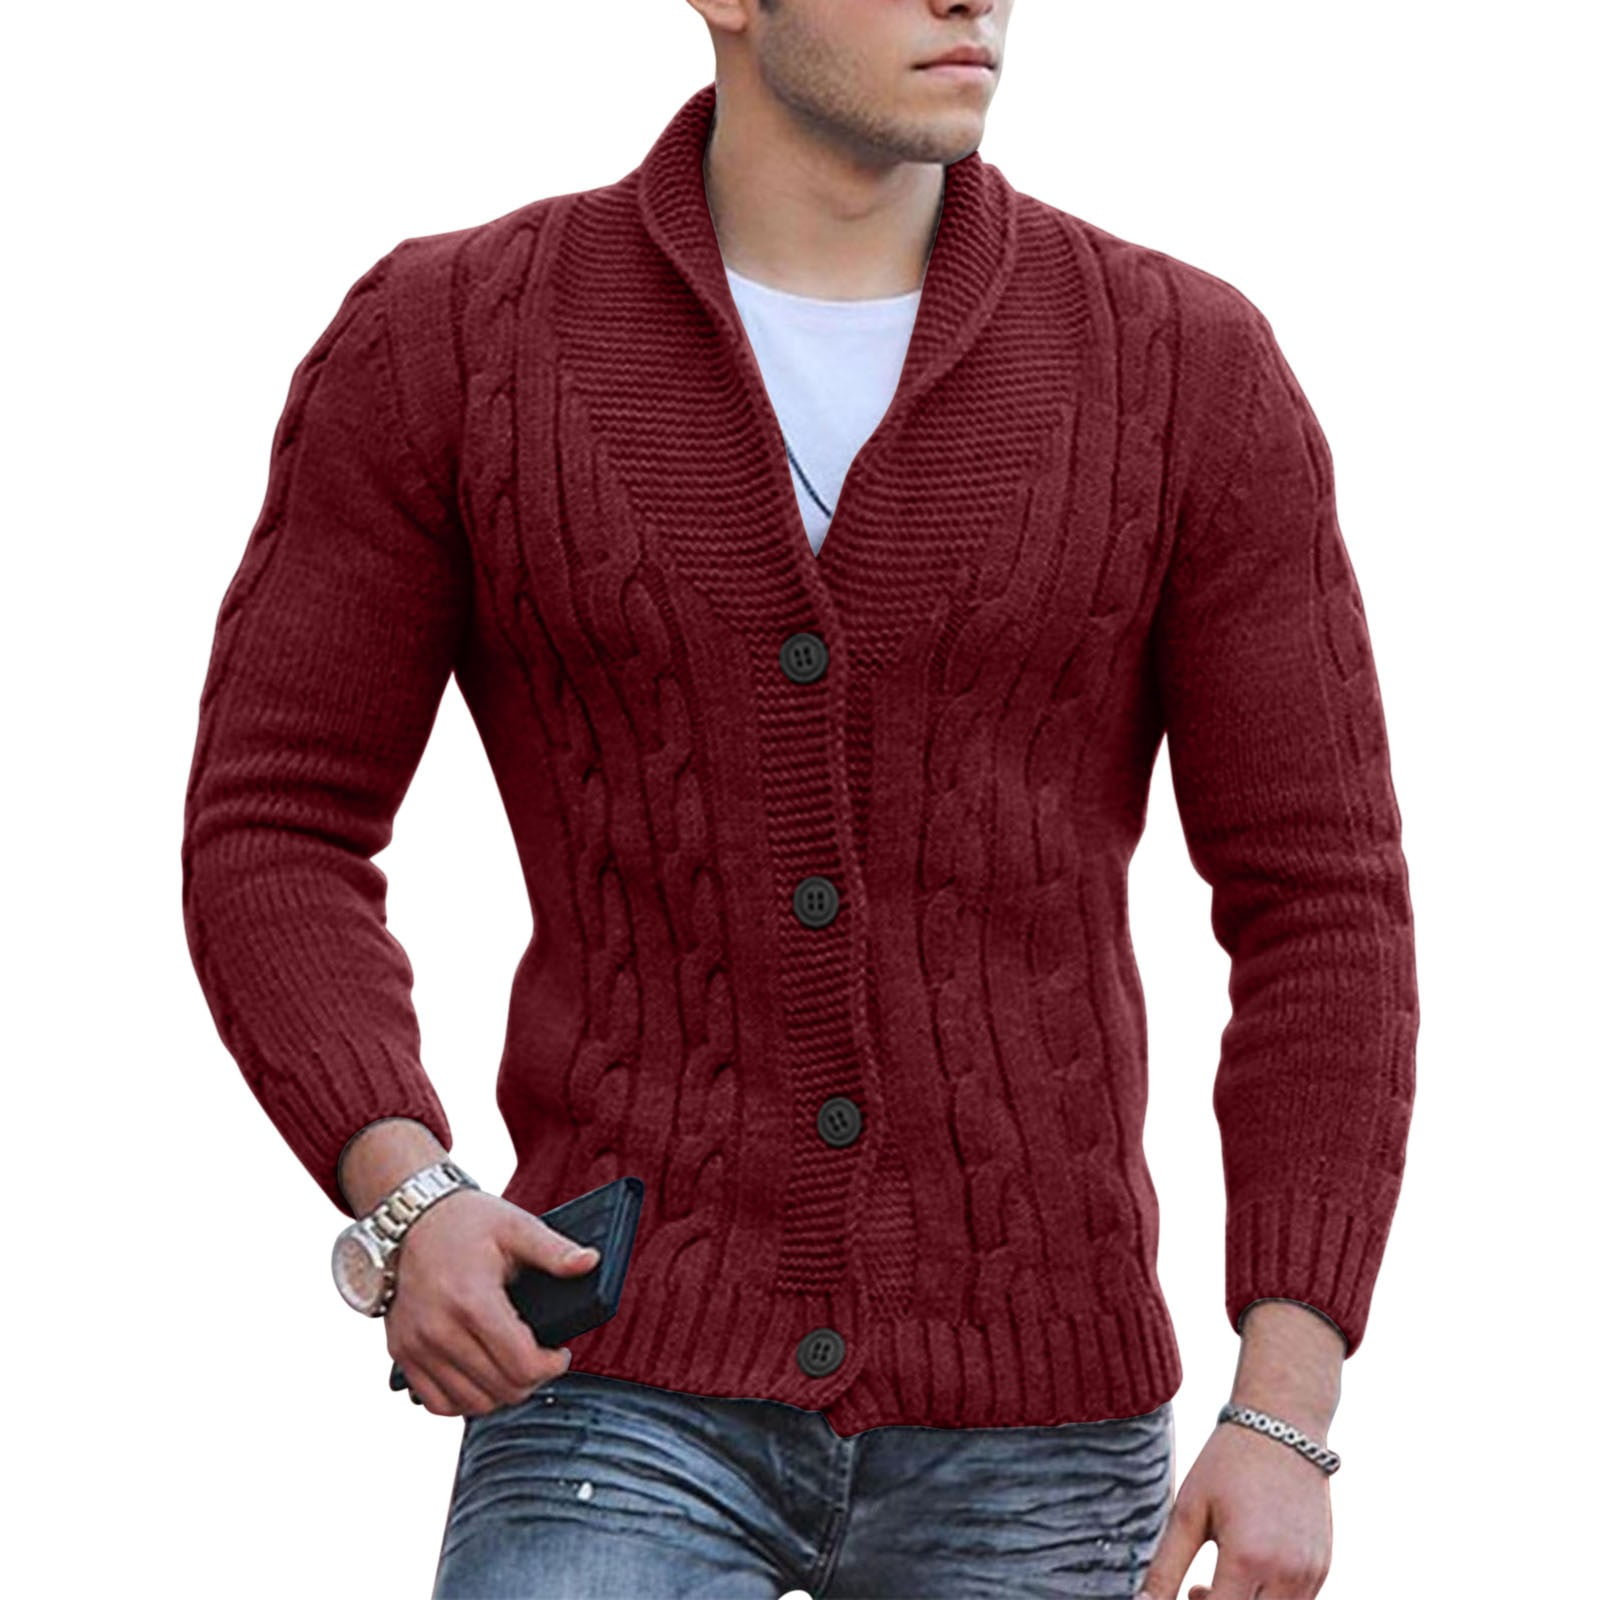 TOWED22 Men V Neck Sweater,Men's Cardigan Sweater Vintage Style Casual ...